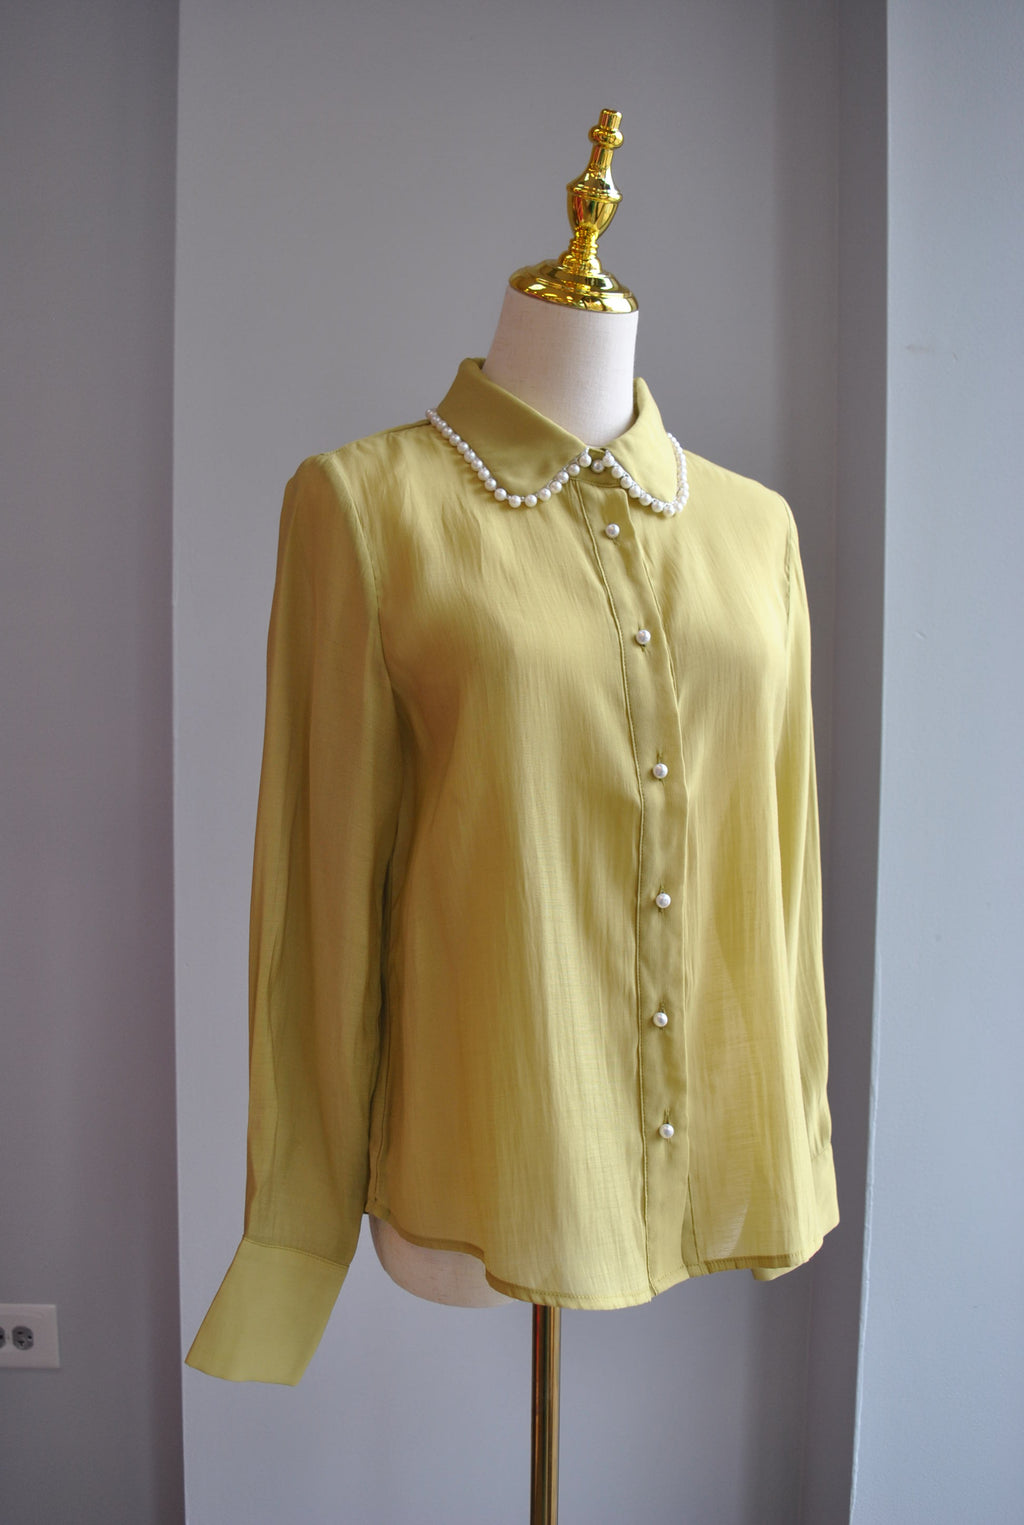 OLIVE GREEN BLOUSE WITH PEARLS